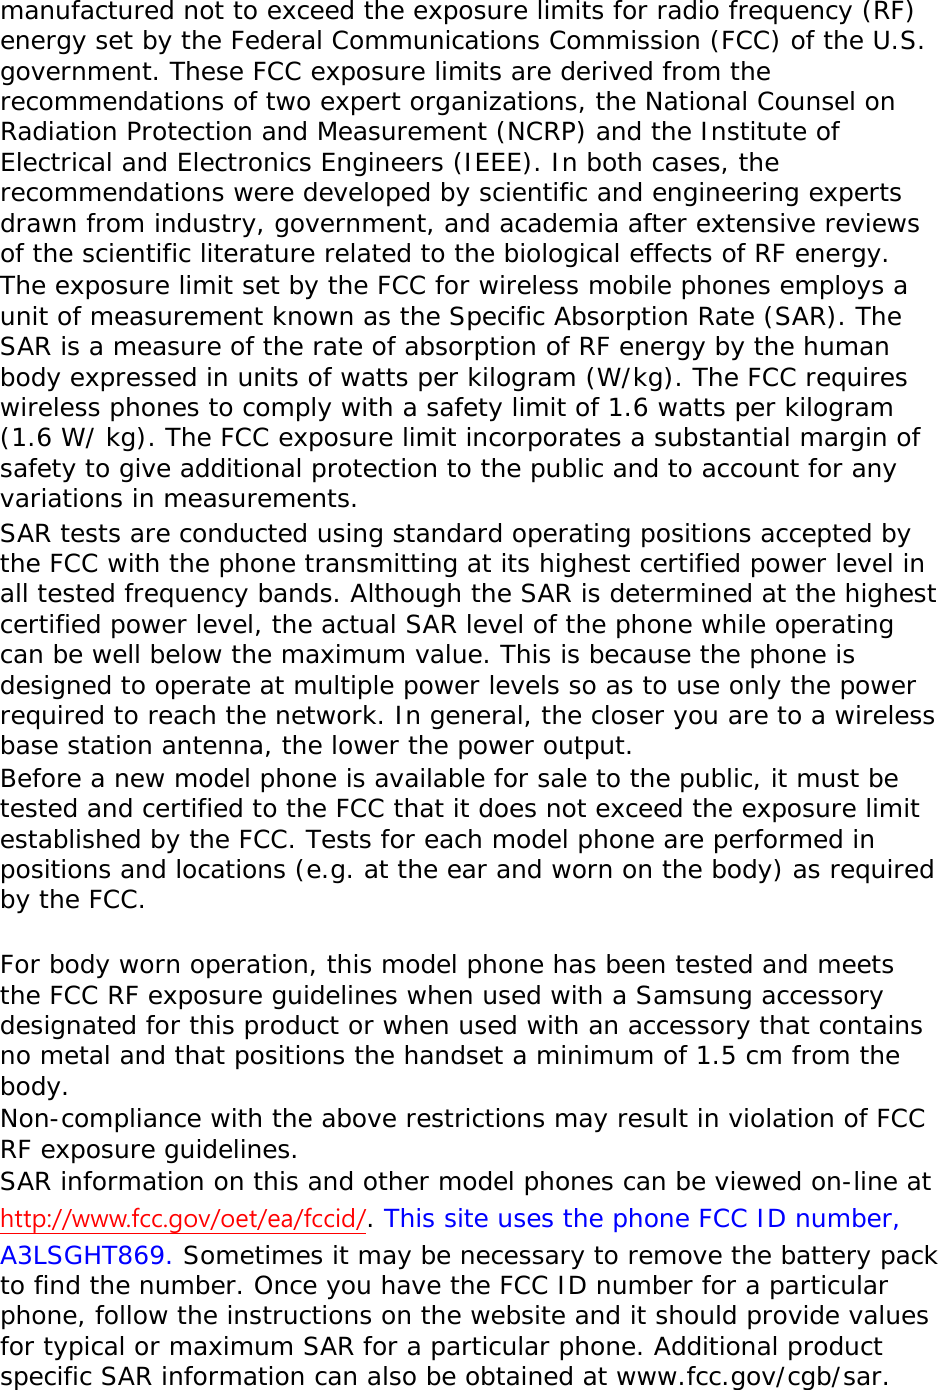 manufactured not to exceed the exposure limits for radio frequency (RF) energy set by the Federal Communications Commission (FCC) of the U.S. government. These FCC exposure limits are derived from the recommendations of two expert organizations, the National Counsel on Radiation Protection and Measurement (NCRP) and the Institute of Electrical and Electronics Engineers (IEEE). In both cases, the recommendations were developed by scientific and engineering experts drawn from industry, government, and academia after extensive reviews of the scientific literature related to the biological effects of RF energy. The exposure limit set by the FCC for wireless mobile phones employs a unit of measurement known as the Specific Absorption Rate (SAR). The SAR is a measure of the rate of absorption of RF energy by the human body expressed in units of watts per kilogram (W/kg). The FCC requires wireless phones to comply with a safety limit of 1.6 watts per kilogram (1.6 W/ kg). The FCC exposure limit incorporates a substantial margin of safety to give additional protection to the public and to account for any variations in measurements. SAR tests are conducted using standard operating positions accepted by the FCC with the phone transmitting at its highest certified power level in all tested frequency bands. Although the SAR is determined at the highest certified power level, the actual SAR level of the phone while operating can be well below the maximum value. This is because the phone is designed to operate at multiple power levels so as to use only the power required to reach the network. In general, the closer you are to a wireless base station antenna, the lower the power output. Before a new model phone is available for sale to the public, it must be tested and certified to the FCC that it does not exceed the exposure limit established by the FCC. Tests for each model phone are performed in positions and locations (e.g. at the ear and worn on the body) as required by the FCC.    For body worn operation, this model phone has been tested and meets the FCC RF exposure guidelines when used with a Samsung accessory designated for this product or when used with an accessory that contains no metal and that positions the handset a minimum of 1.5 cm from the body.  Non-compliance with the above restrictions may result in violation of FCC RF exposure guidelines. SAR information on this and other model phones can be viewed on-line at http://www.fcc.gov/oet/ea/fccid/. This site uses the phone FCC ID number, A3LSGHT869. Sometimes it may be necessary to remove the battery pack to find the number. Once you have the FCC ID number for a particular phone, follow the instructions on the website and it should provide values for typical or maximum SAR for a particular phone. Additional product specific SAR information can also be obtained at www.fcc.gov/cgb/sar. 